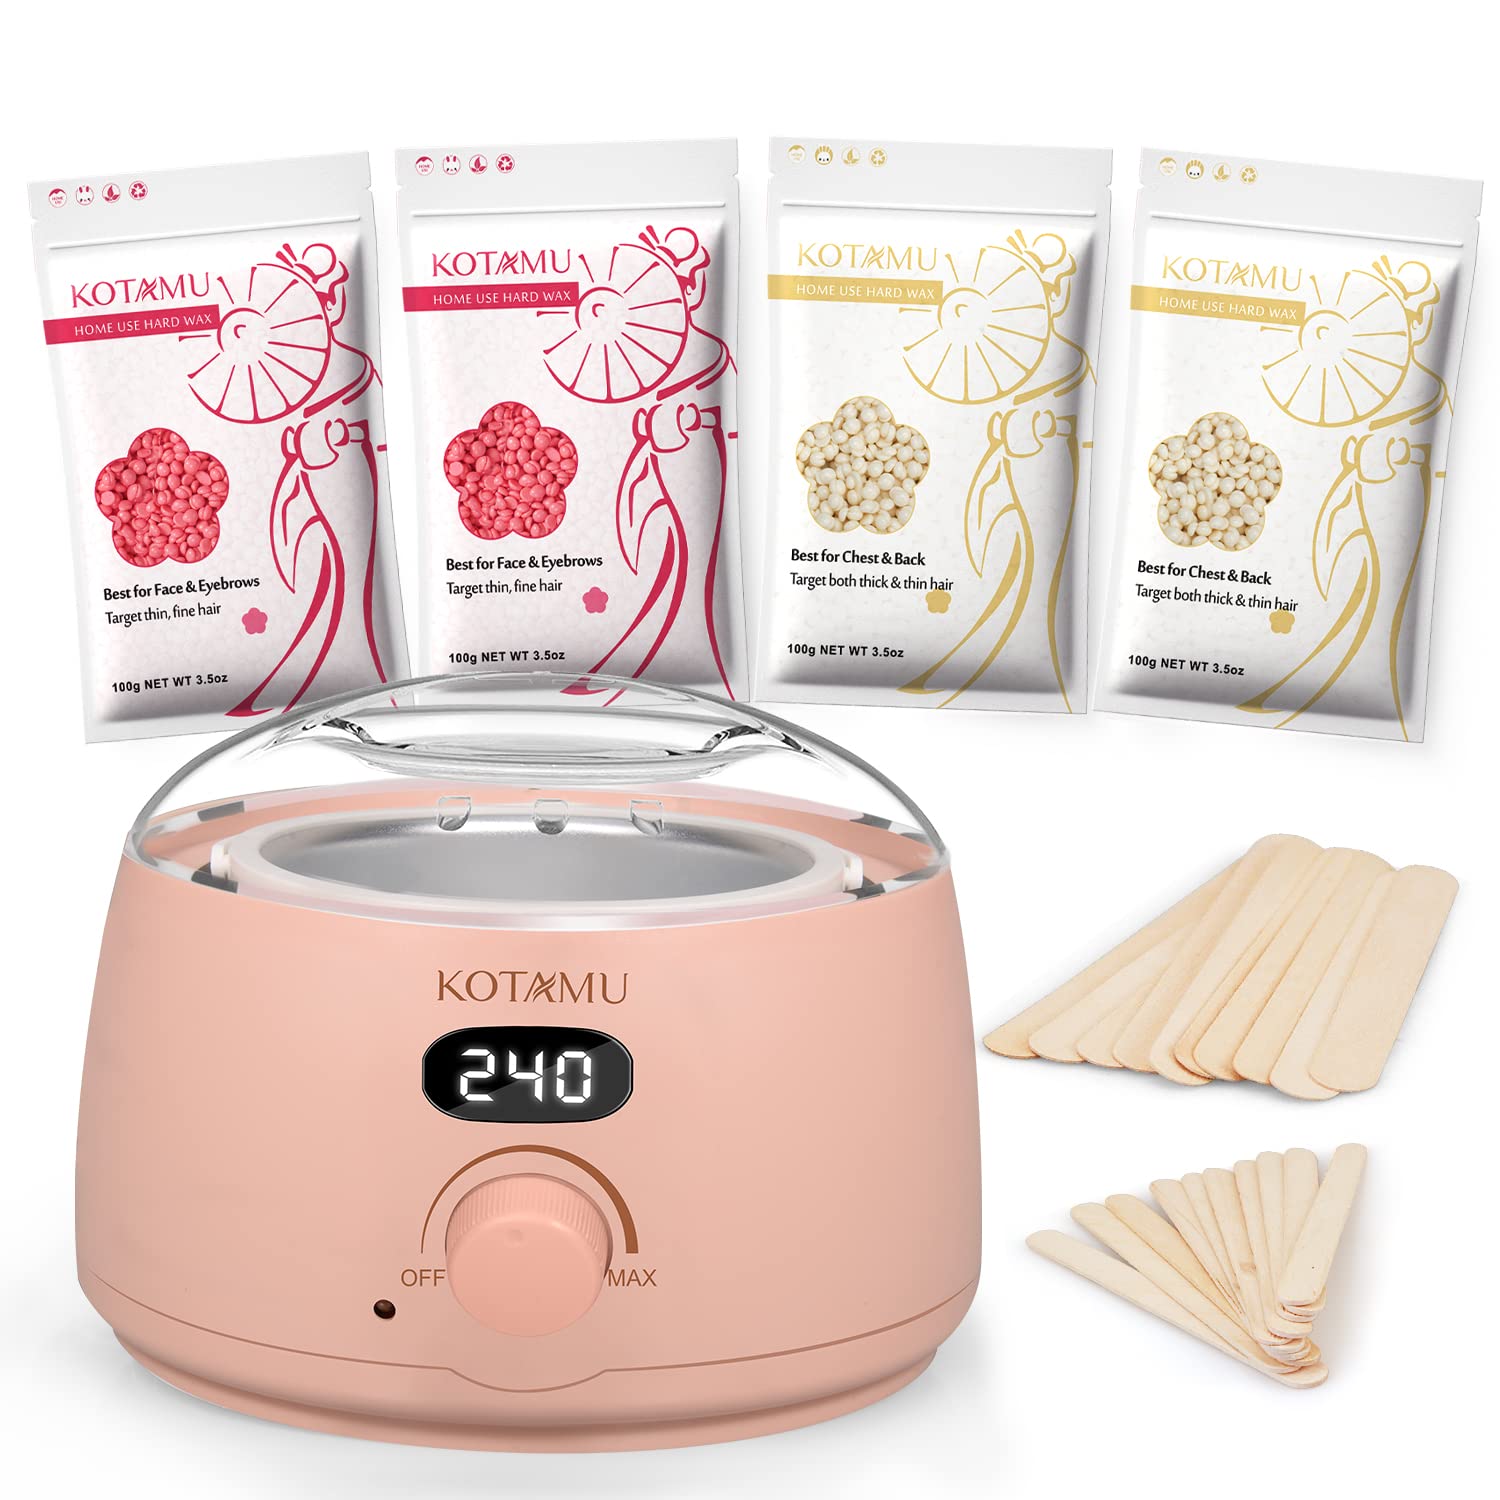 Waxing Kit Duaiu Wax Pot Home Including Professional Wax Warmer Wax Heater  With 4 Pack Hard Wax Beans 10 Wooden Waxing Sticks Hair Removal Kit For Fac